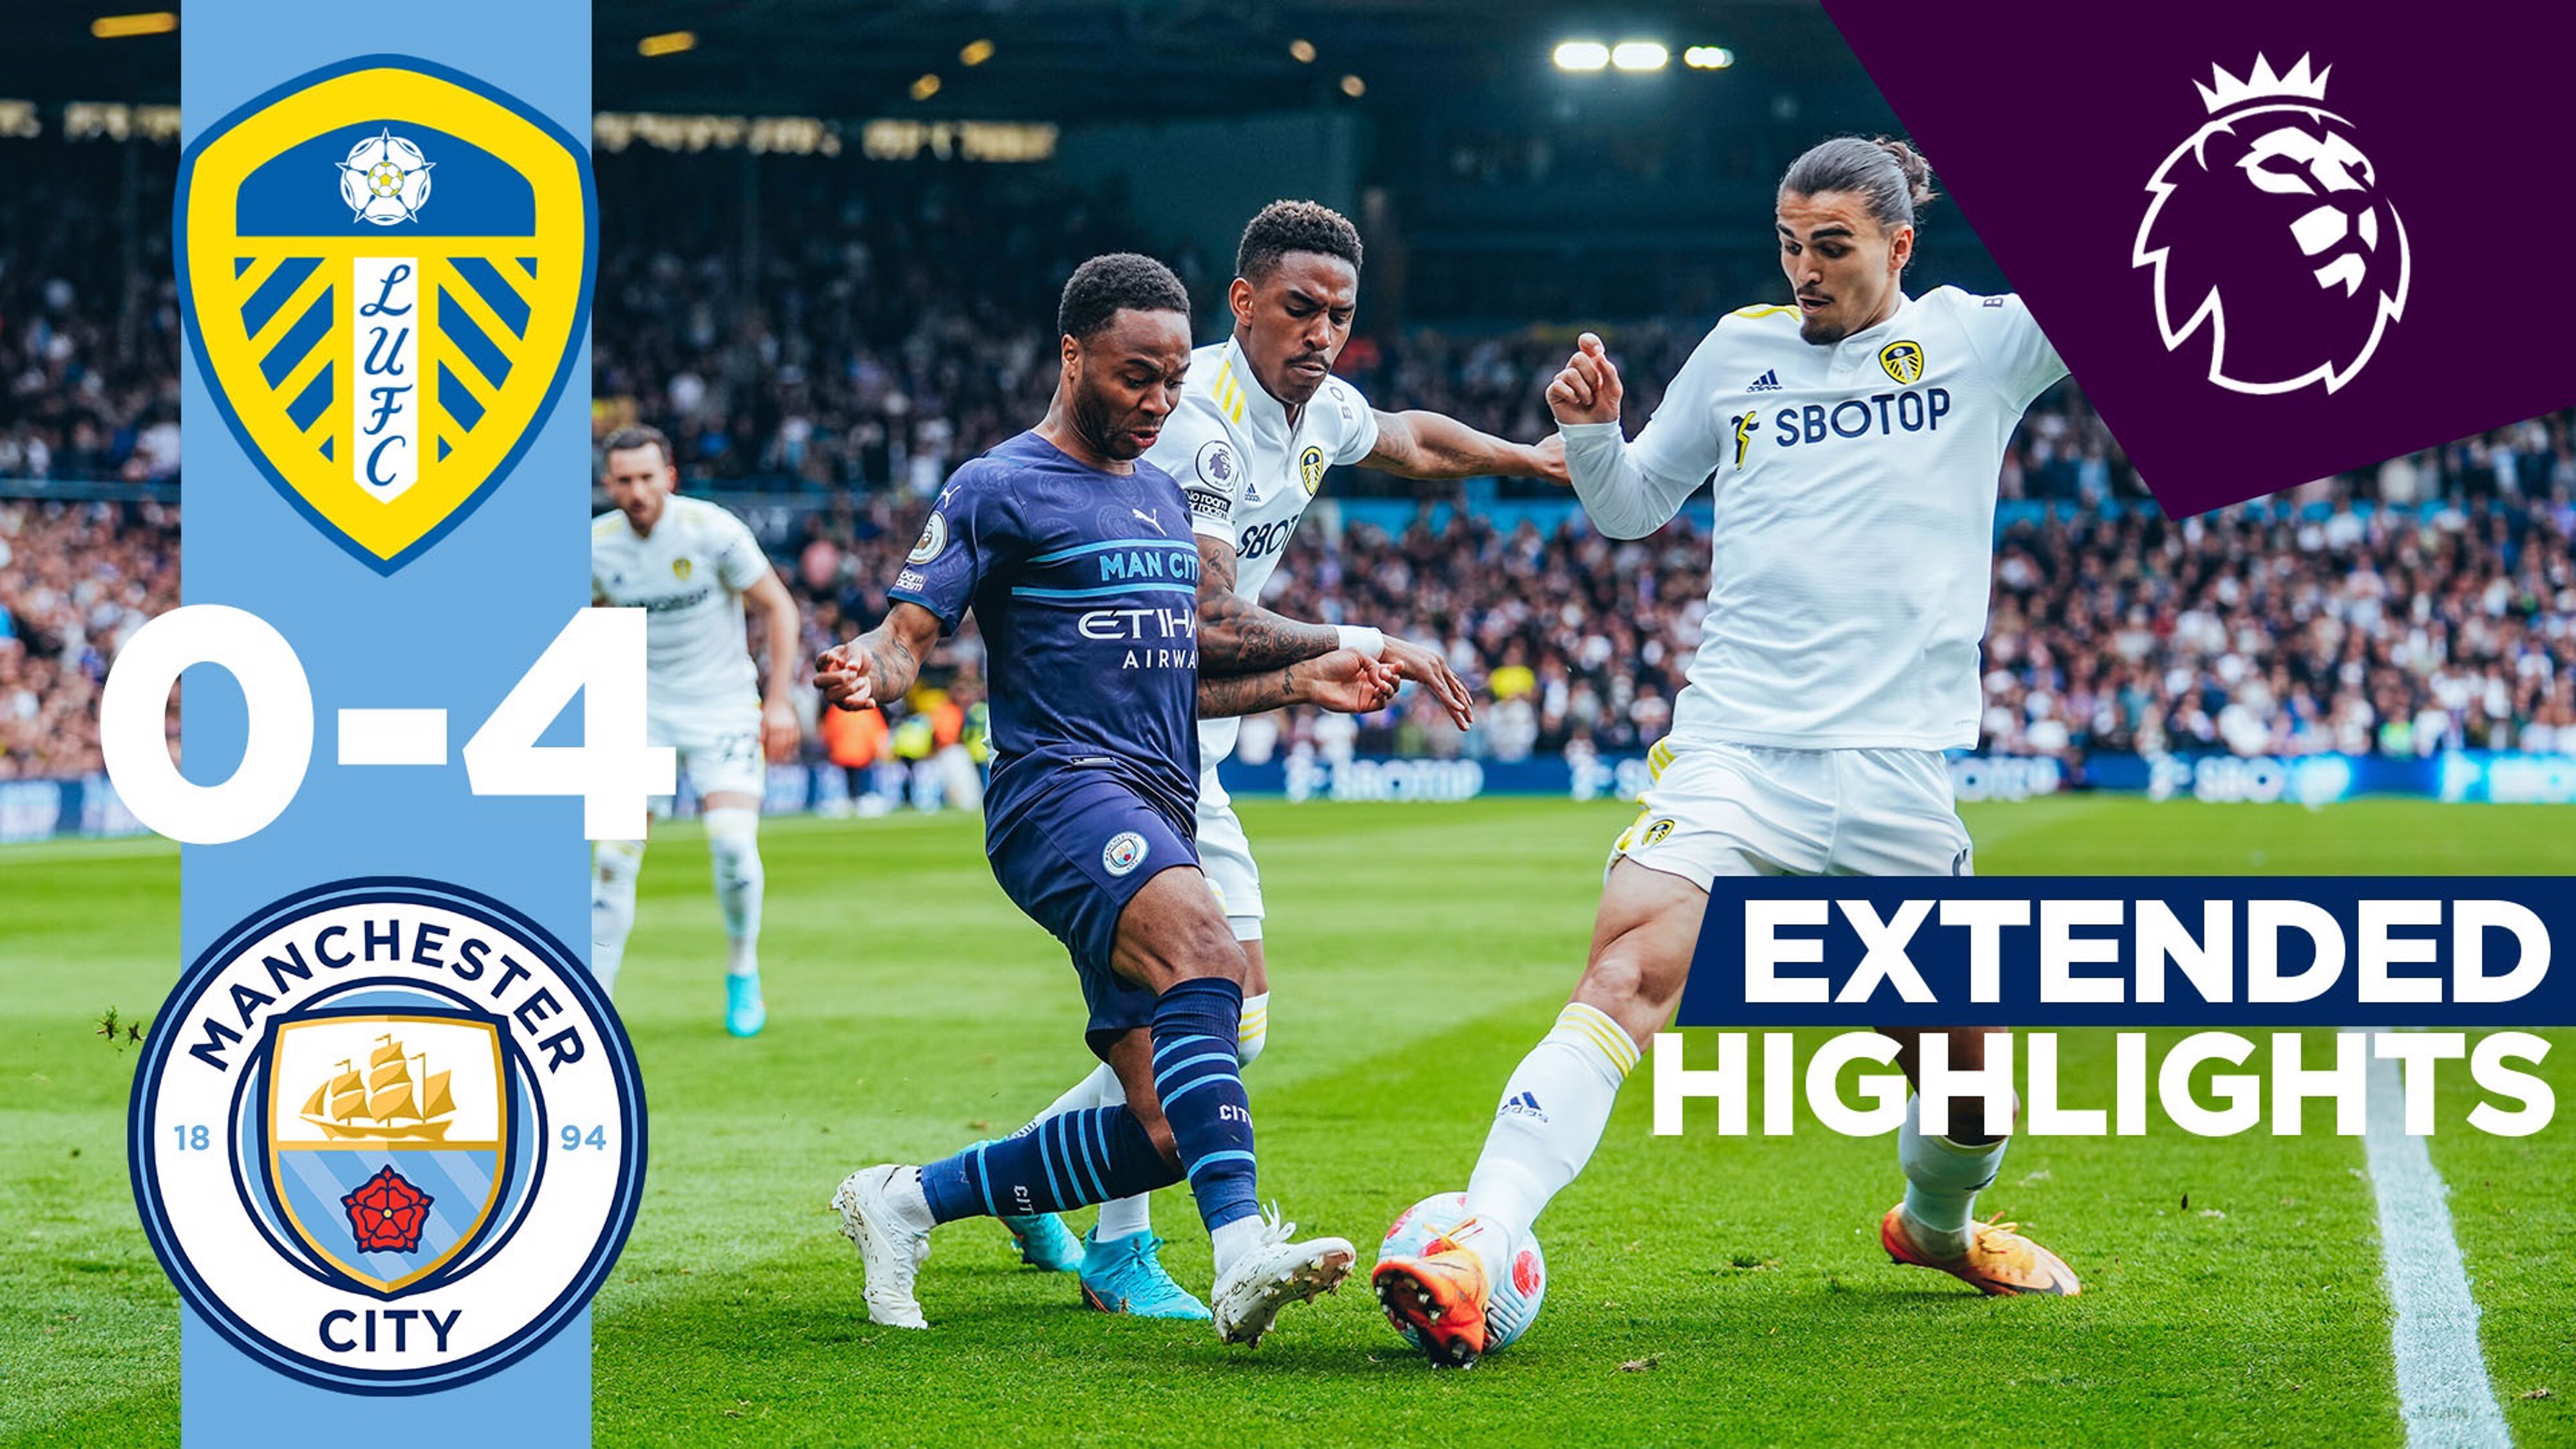 Leeds 0-4 City Extended highlights